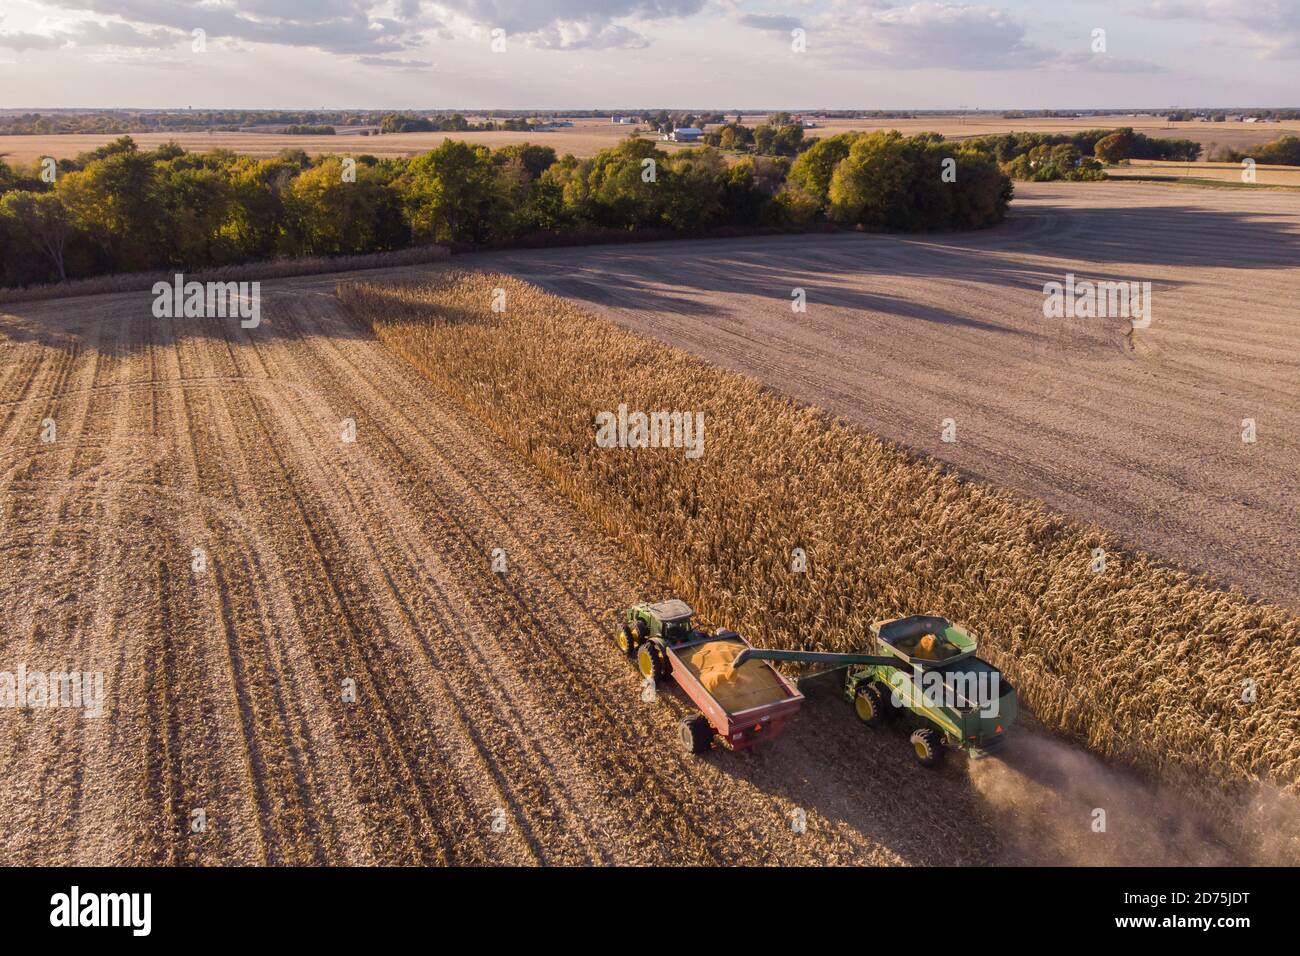 A combine and tractor harvest corn Stock Photo